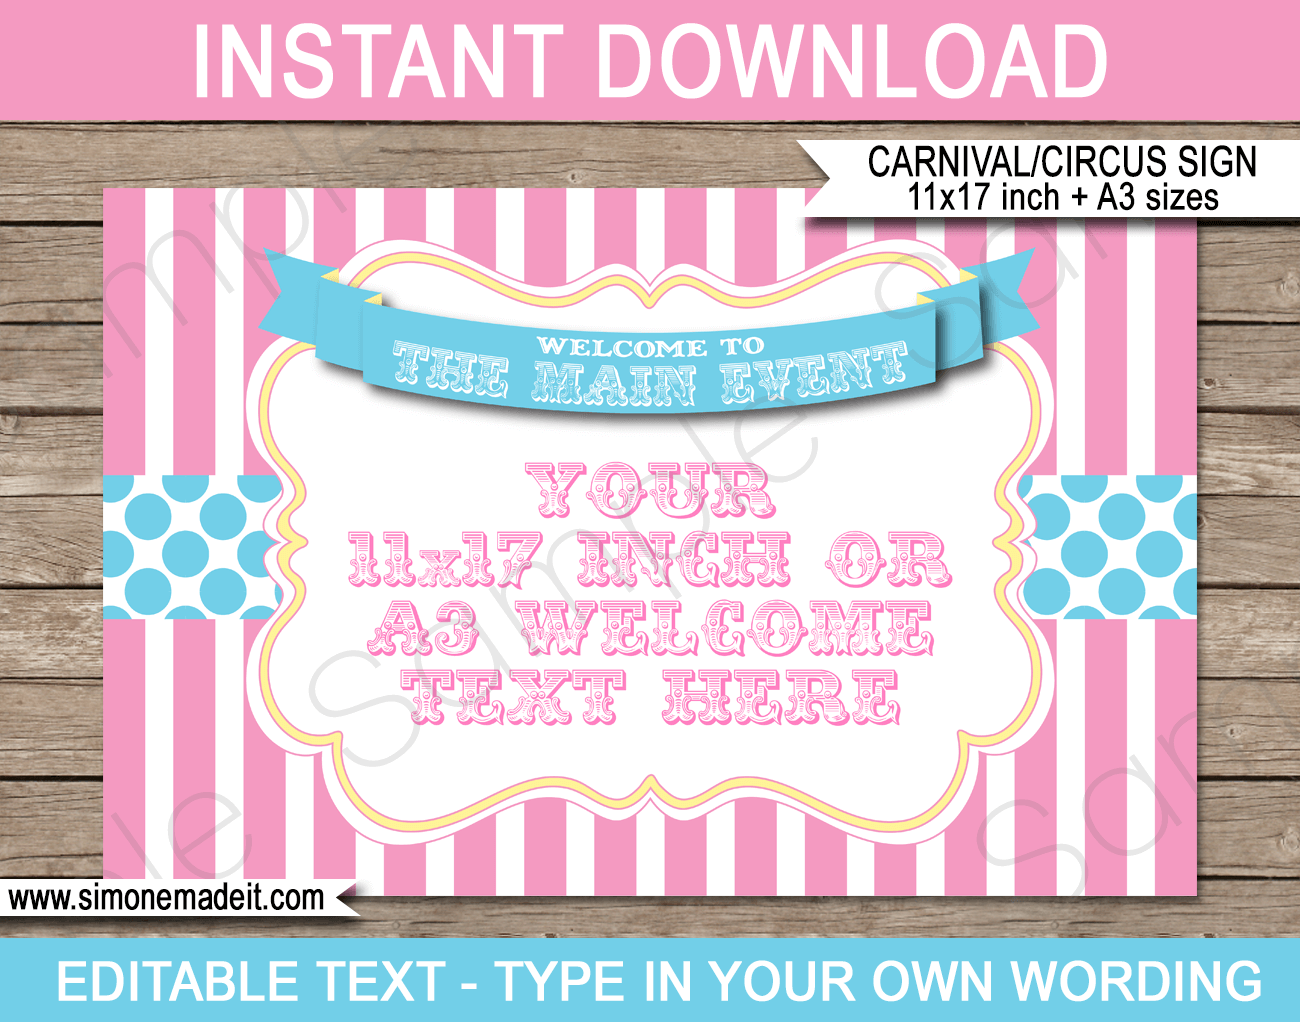 Printable Carnival Birthday Welcome Sign Template with Editable Text | Carnival Theme Party Decorations | $4.00 Instant Download via SIMONEmadeit.com